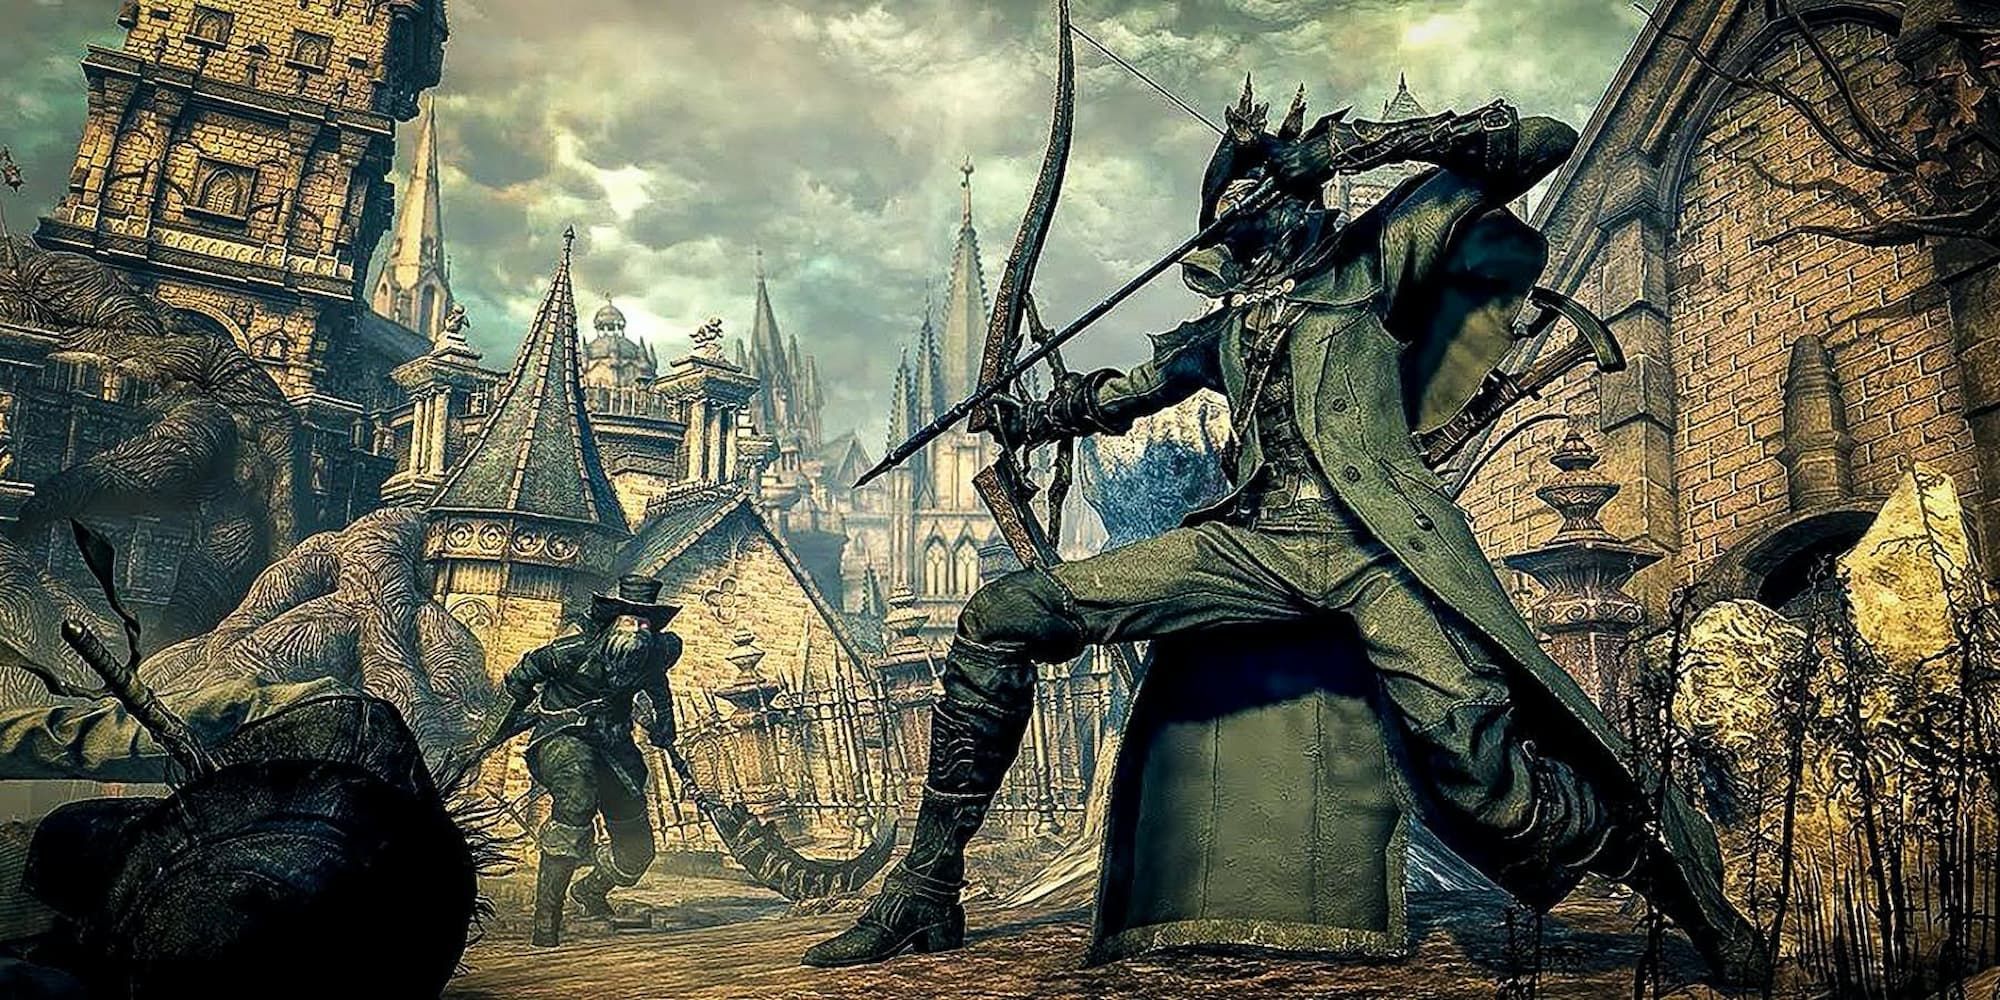 Bloodborne player uses a bow to attack a monster